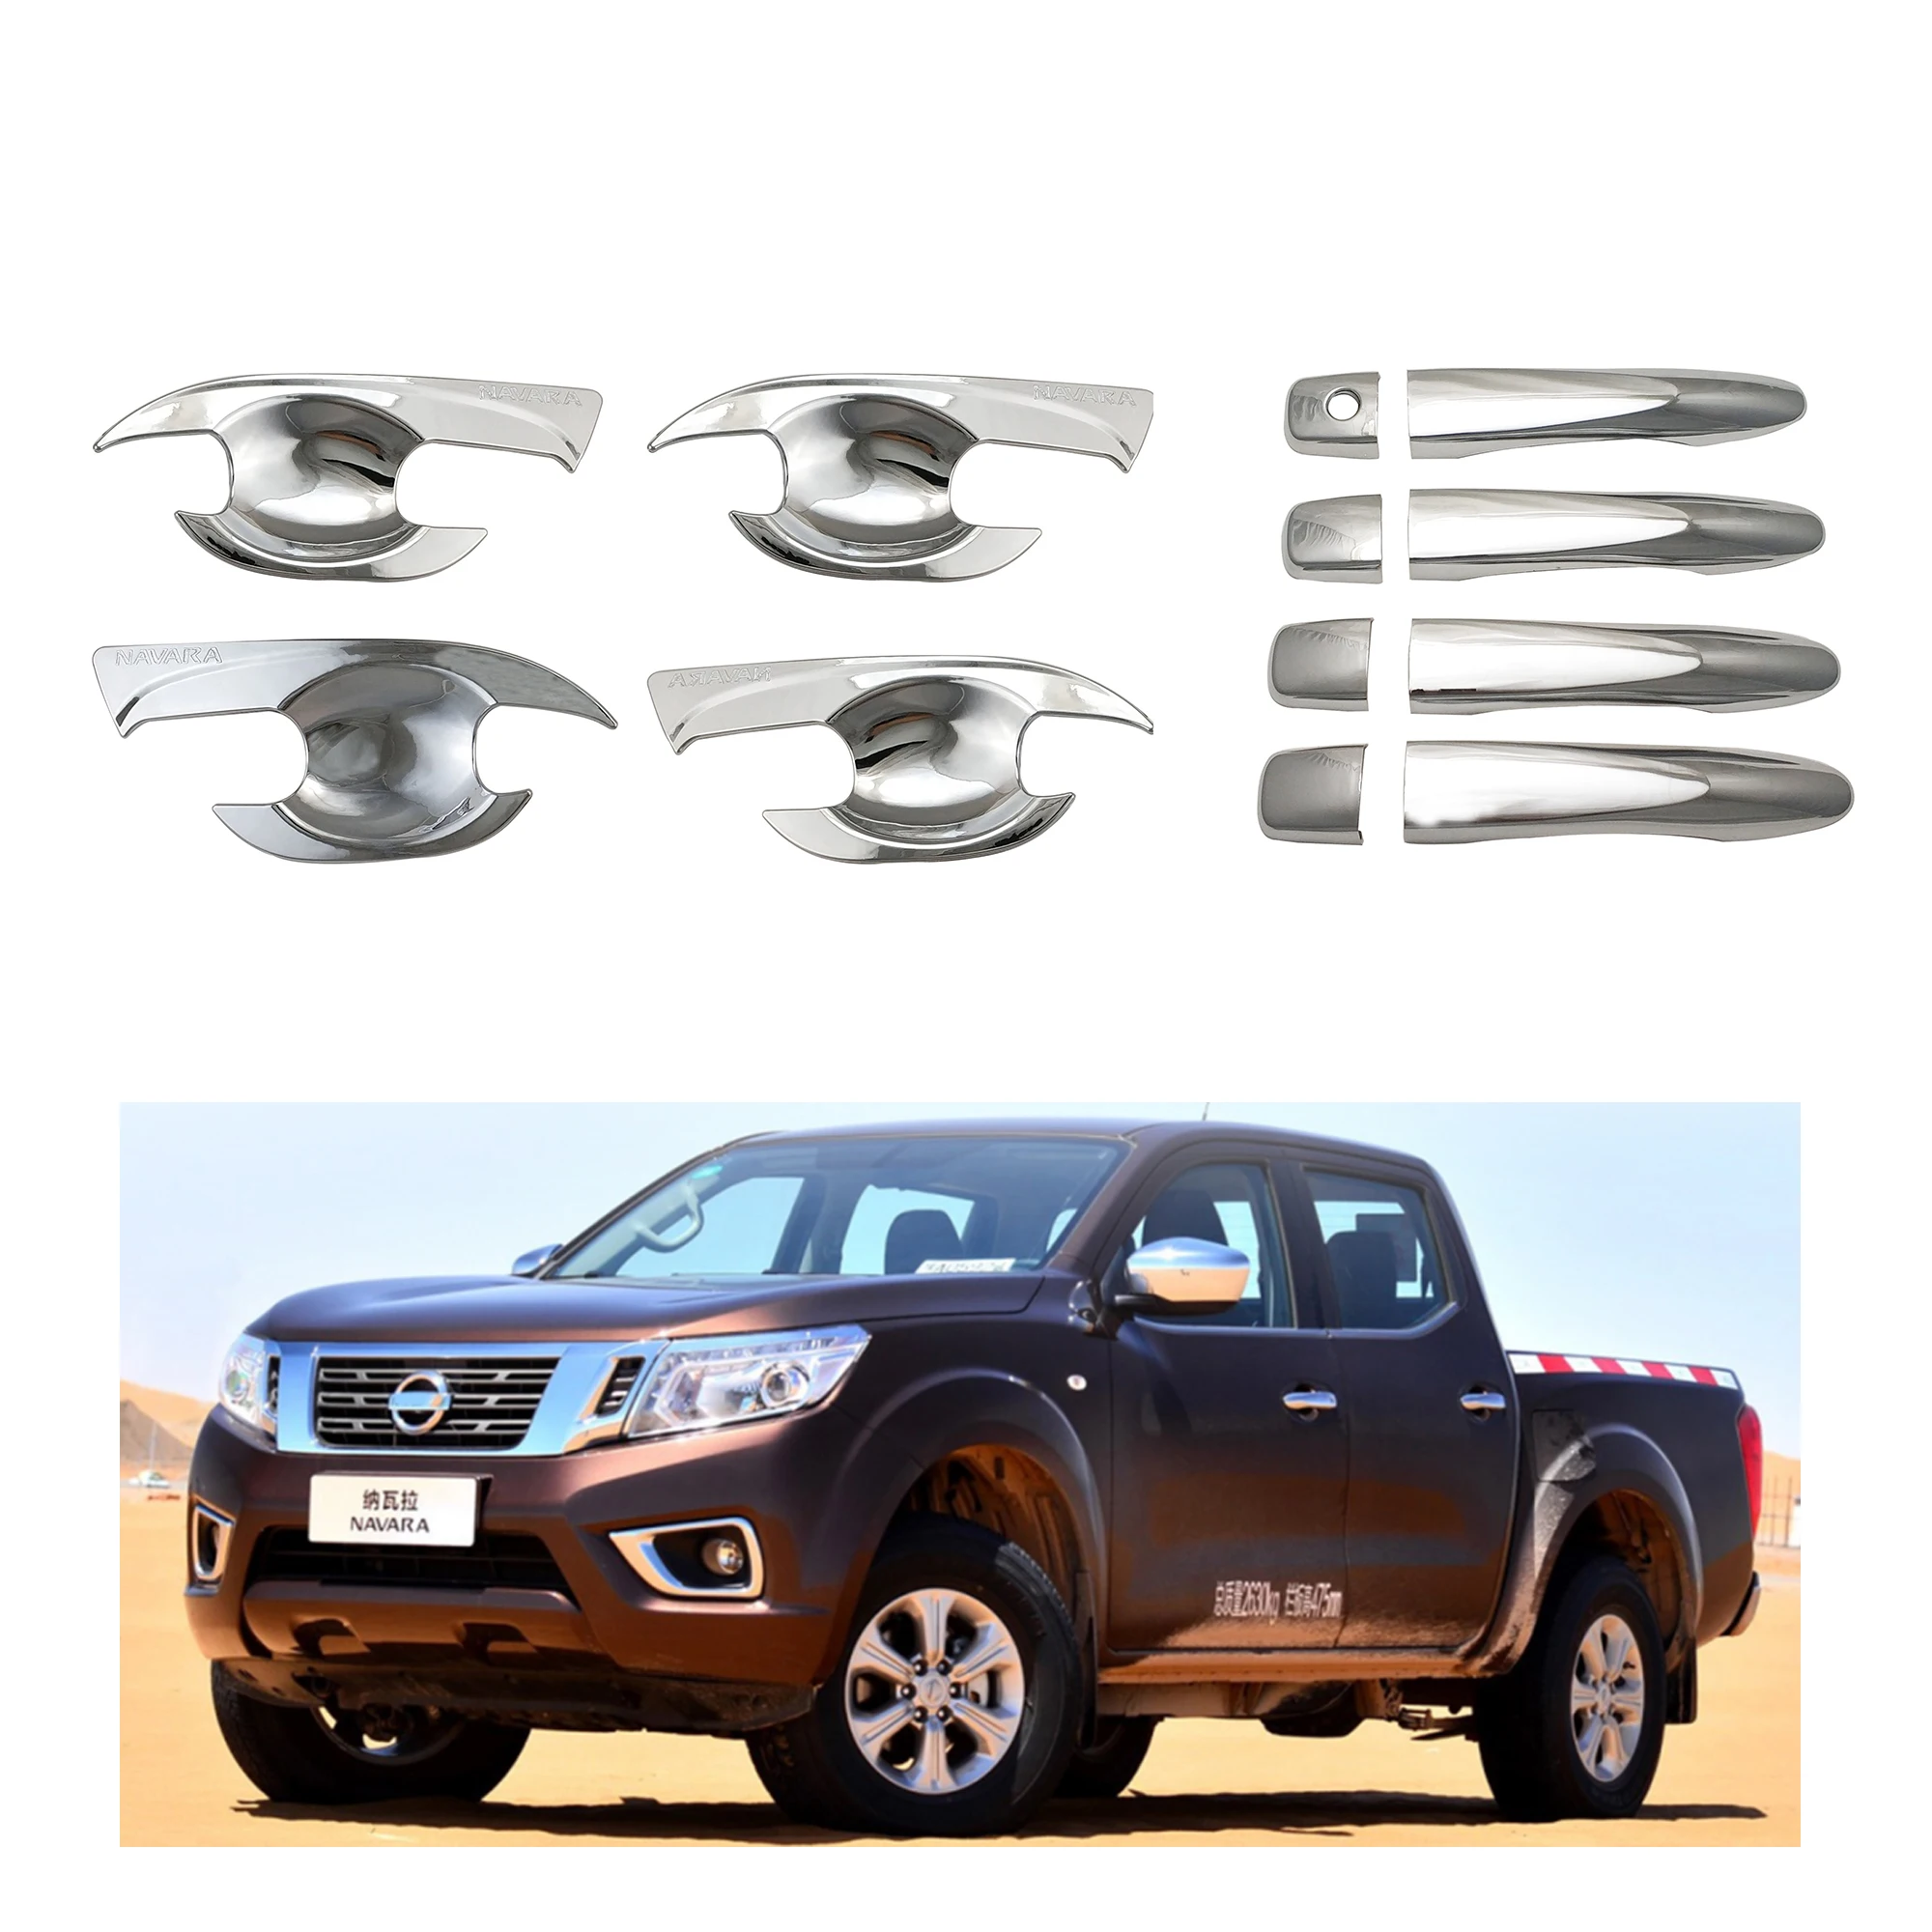 

For Nissan NAVARA NP300 2015 2016 2017 2018 2019 2020 Car Attachment ABS Chrome Door Handle Bowl Cover Protector Paste Style